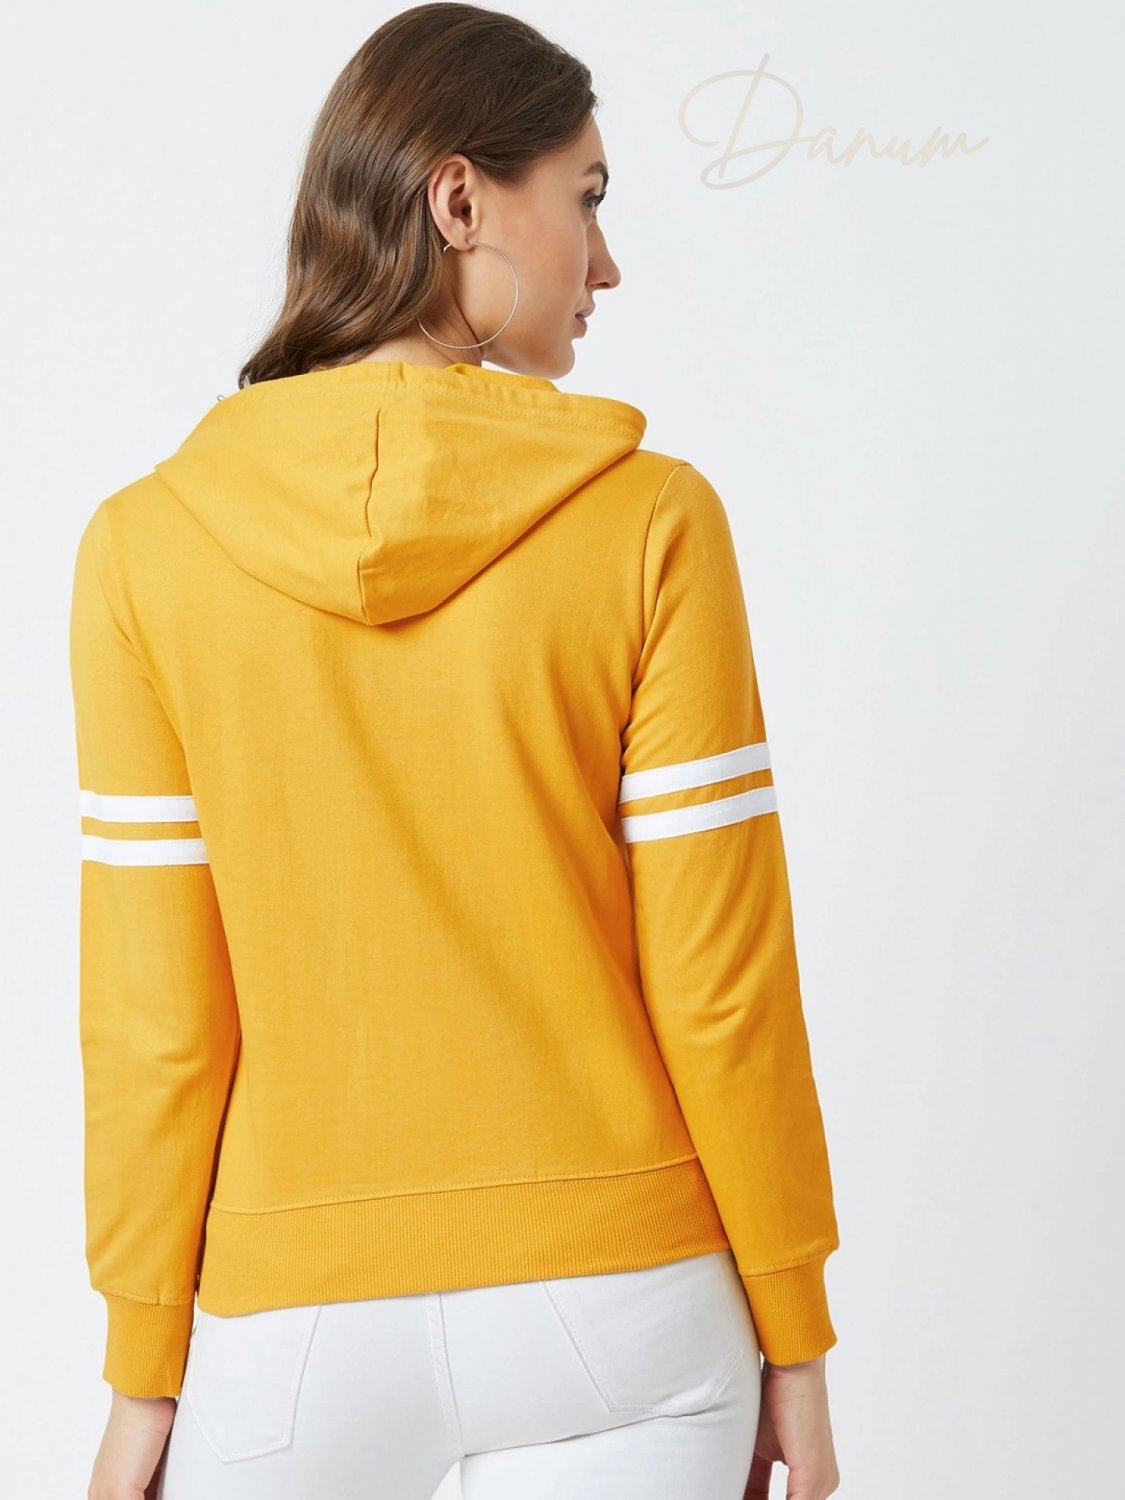 Beautiful Flower embroidery hoodie in Yellow